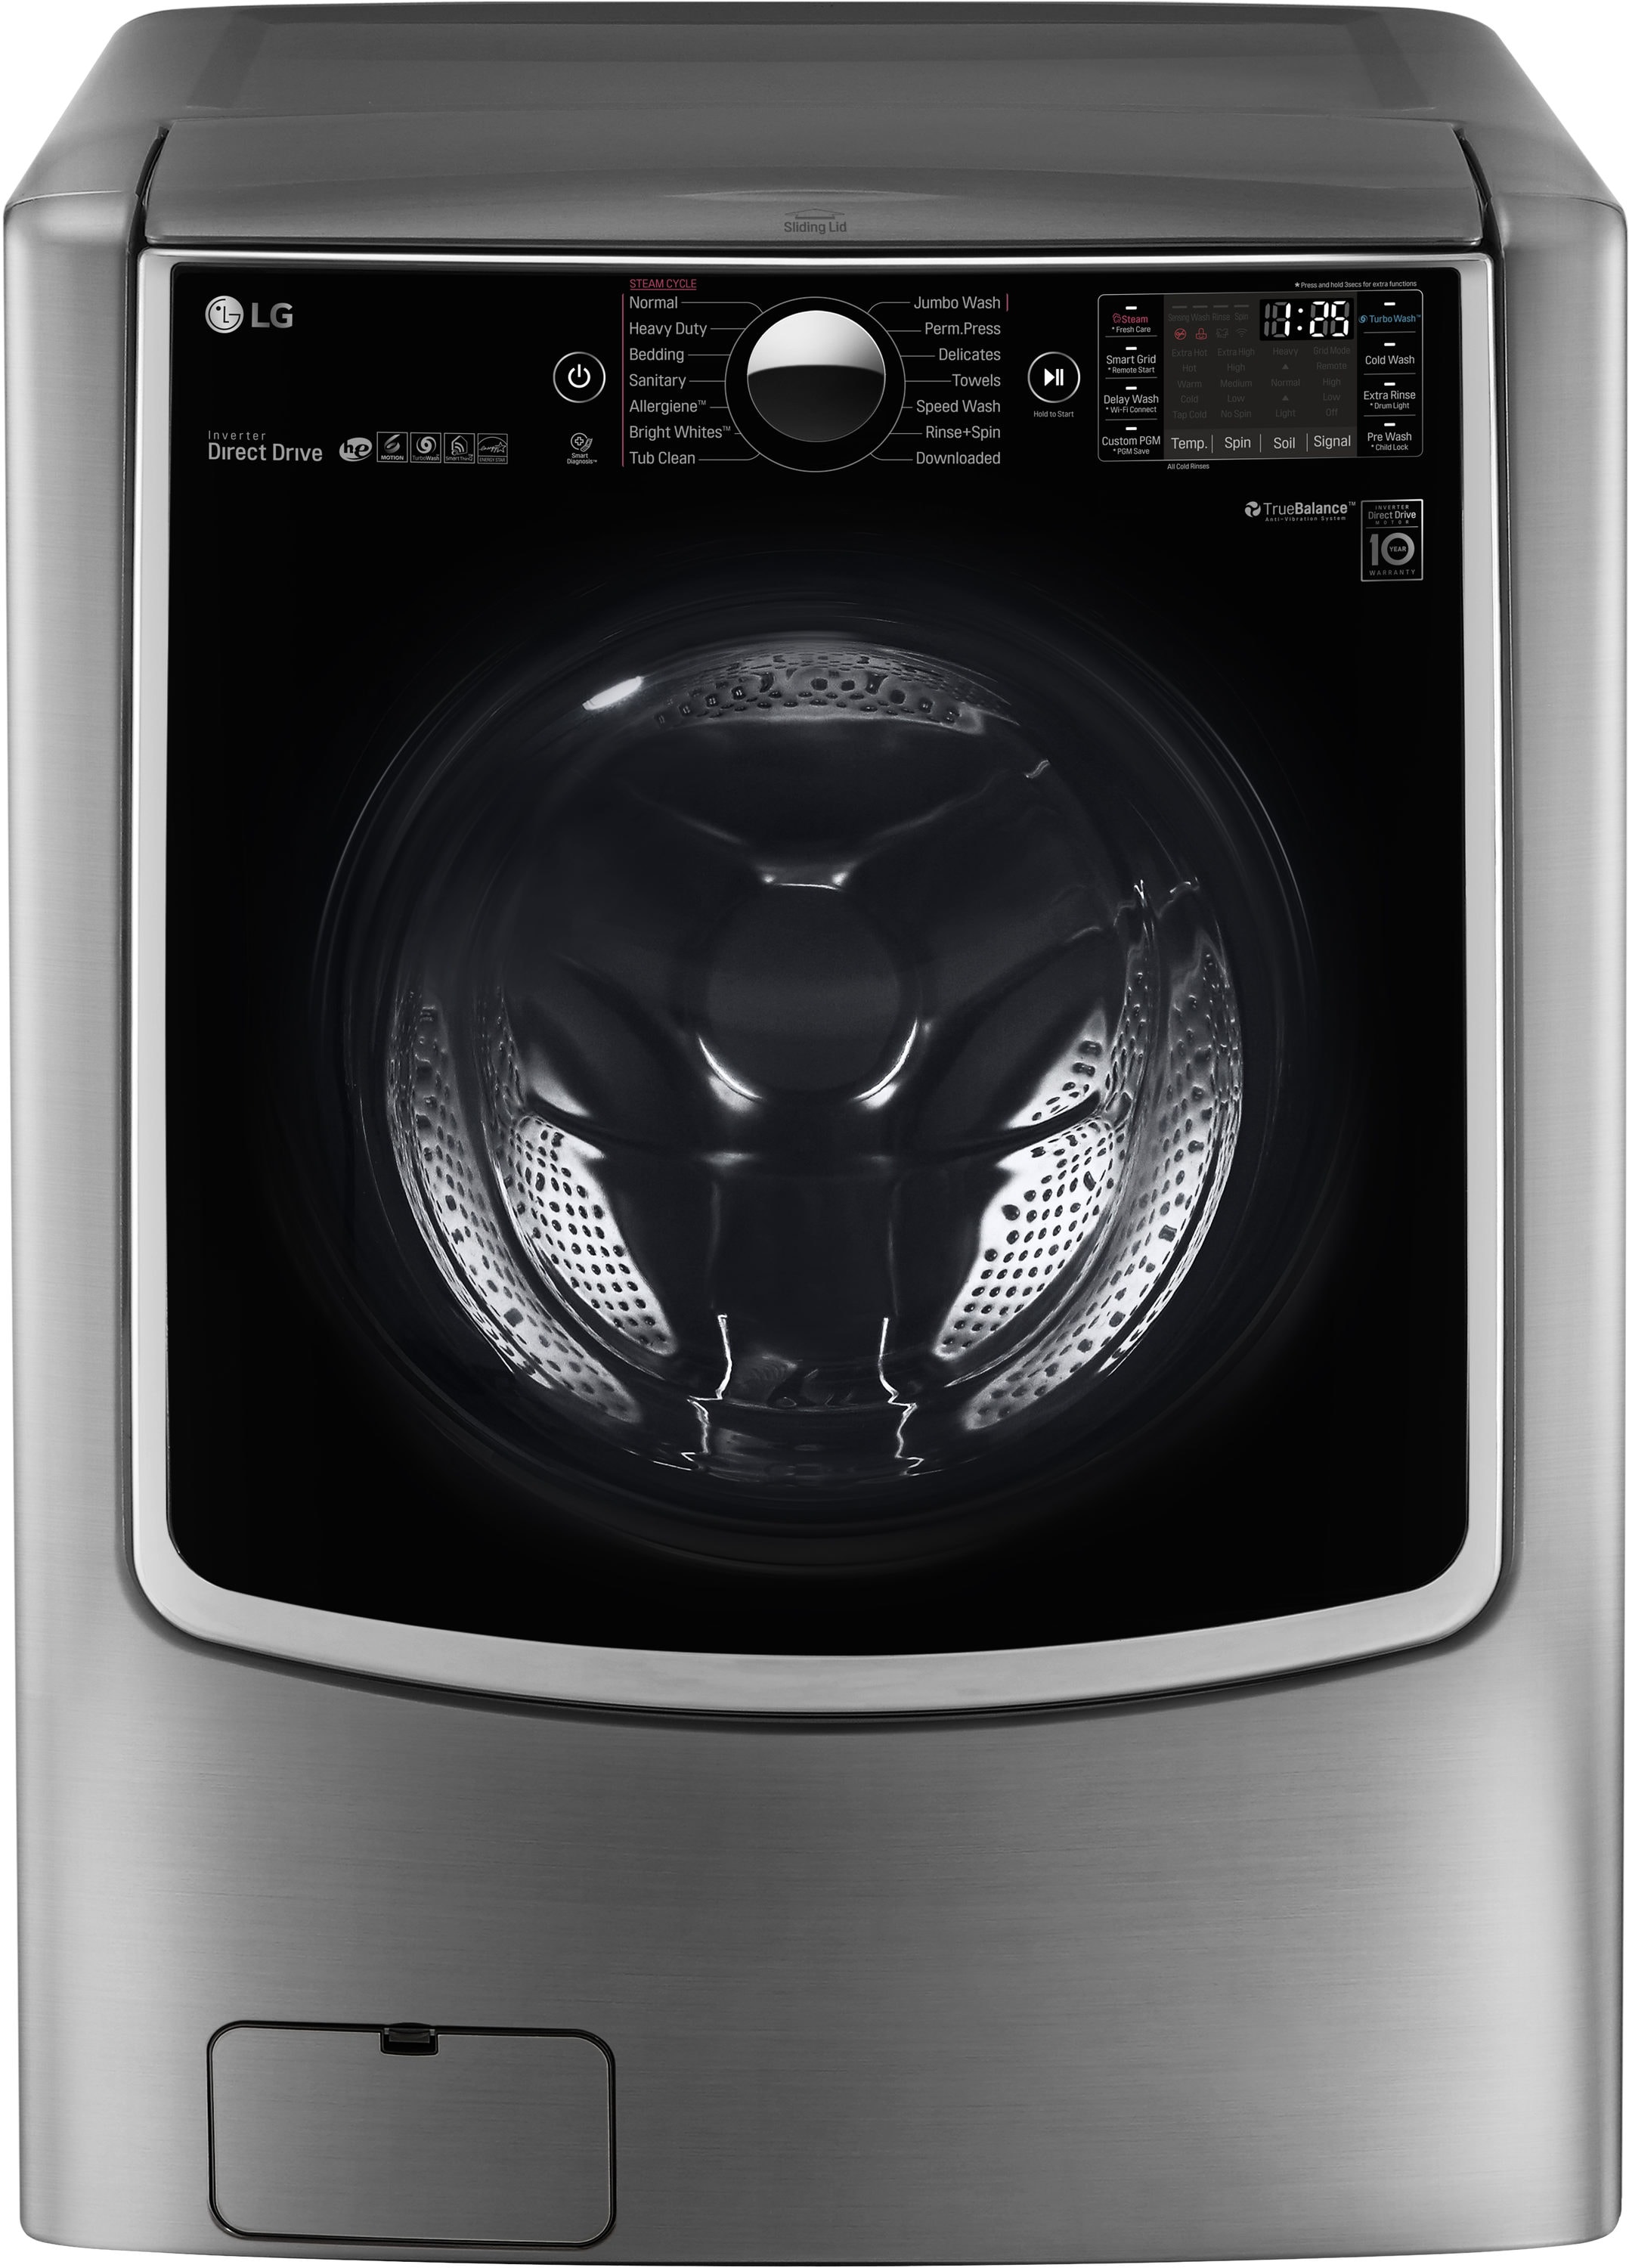 LG TWINWash Enabled 5.2-cu ft High Efficiency Stackable Steam Cycle Smart Front-Load Washer (Graphite Steel) ENERGY STAR at Lowes.com